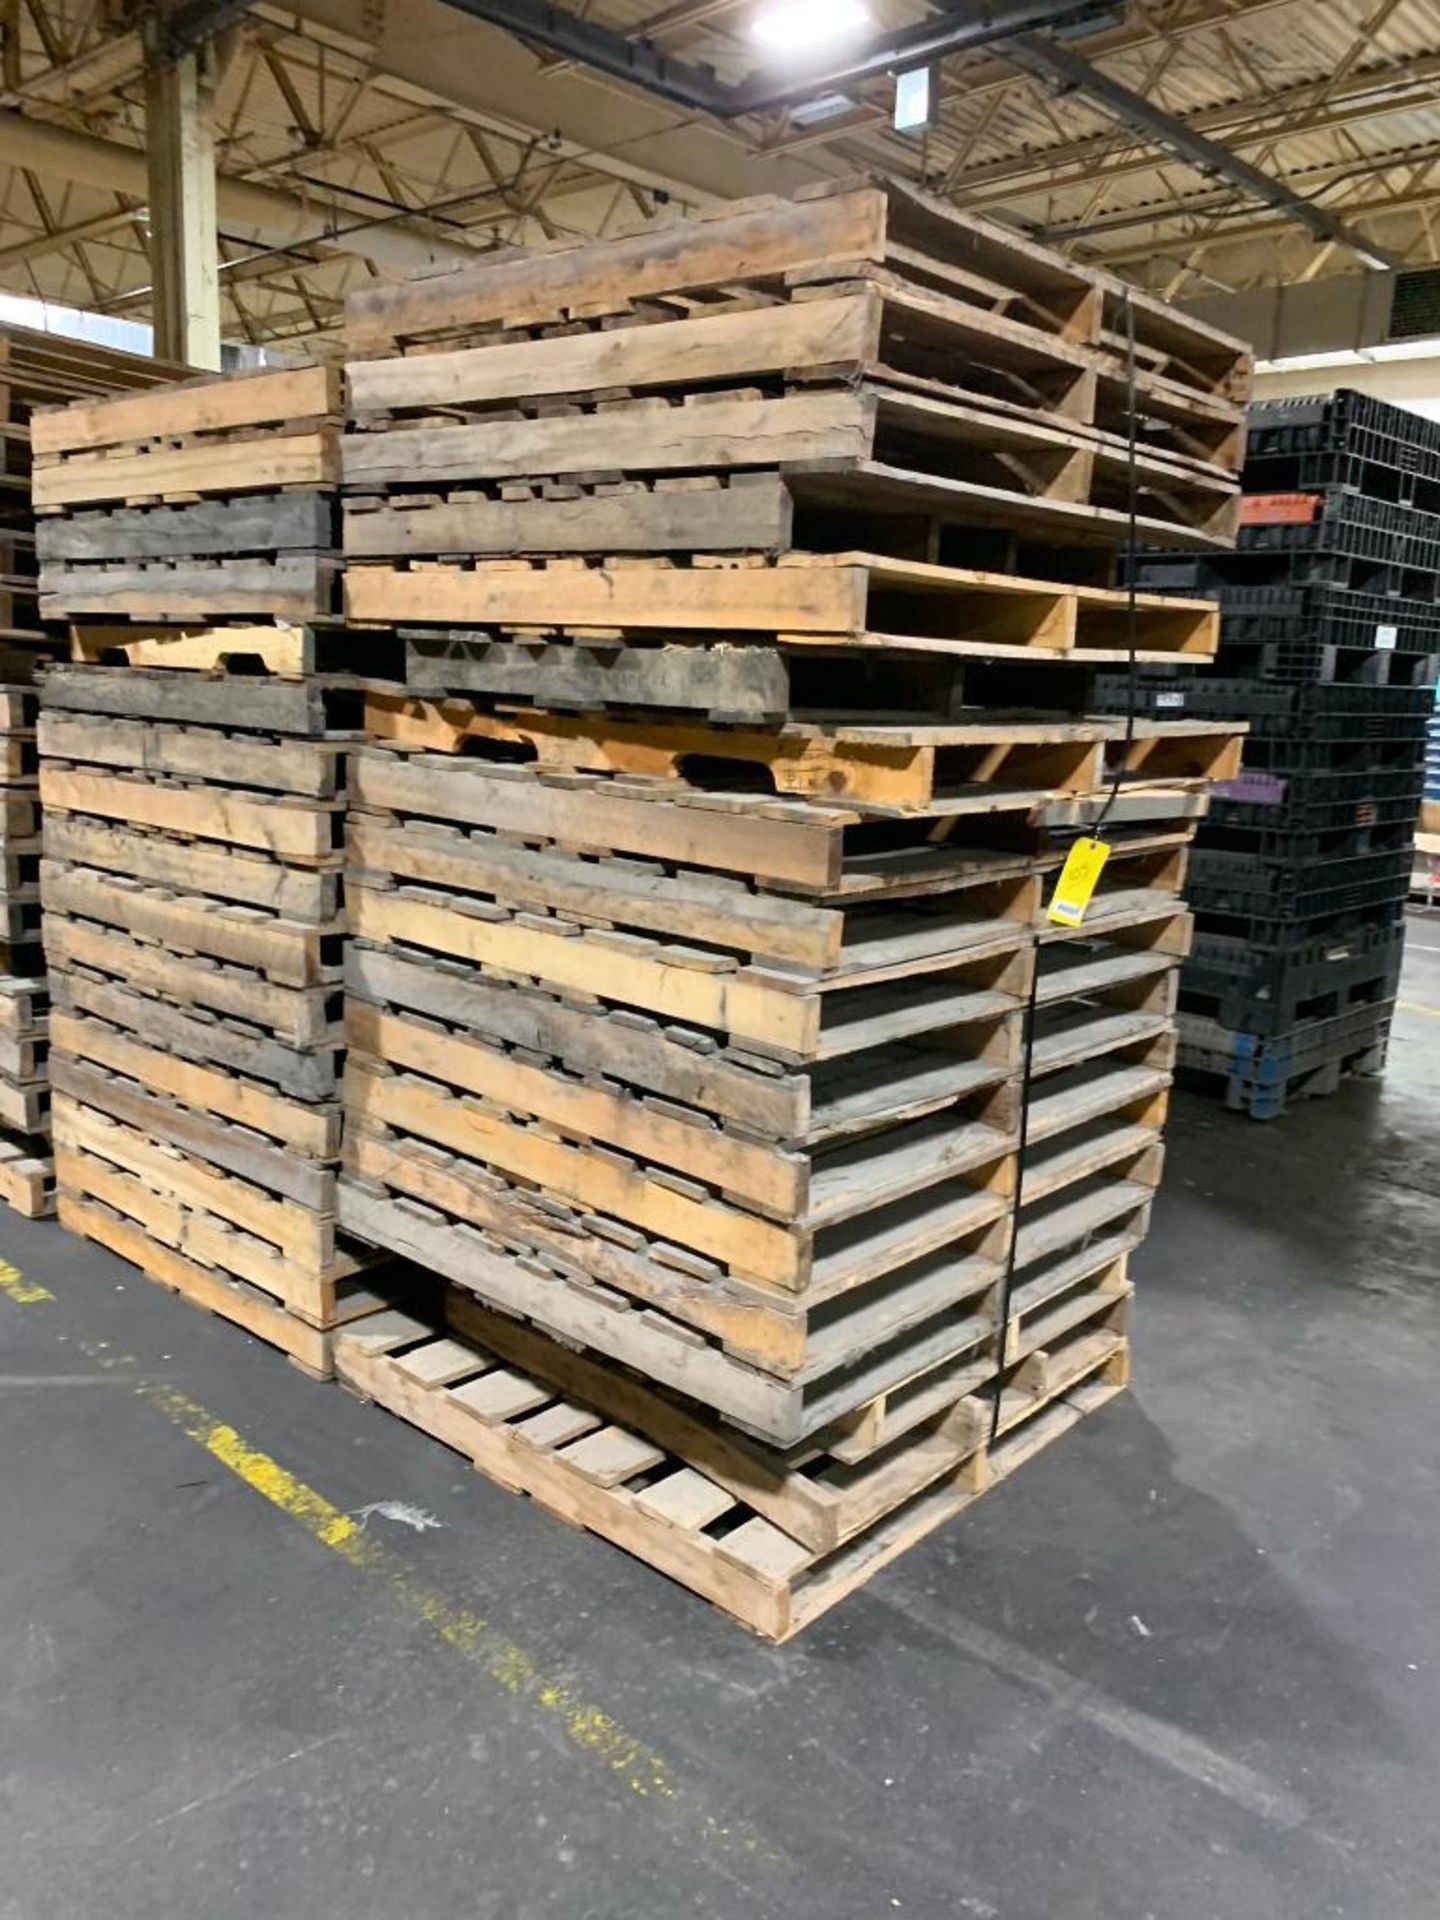 Approx. (105) 48" X 48" Pallets, Some Smaller